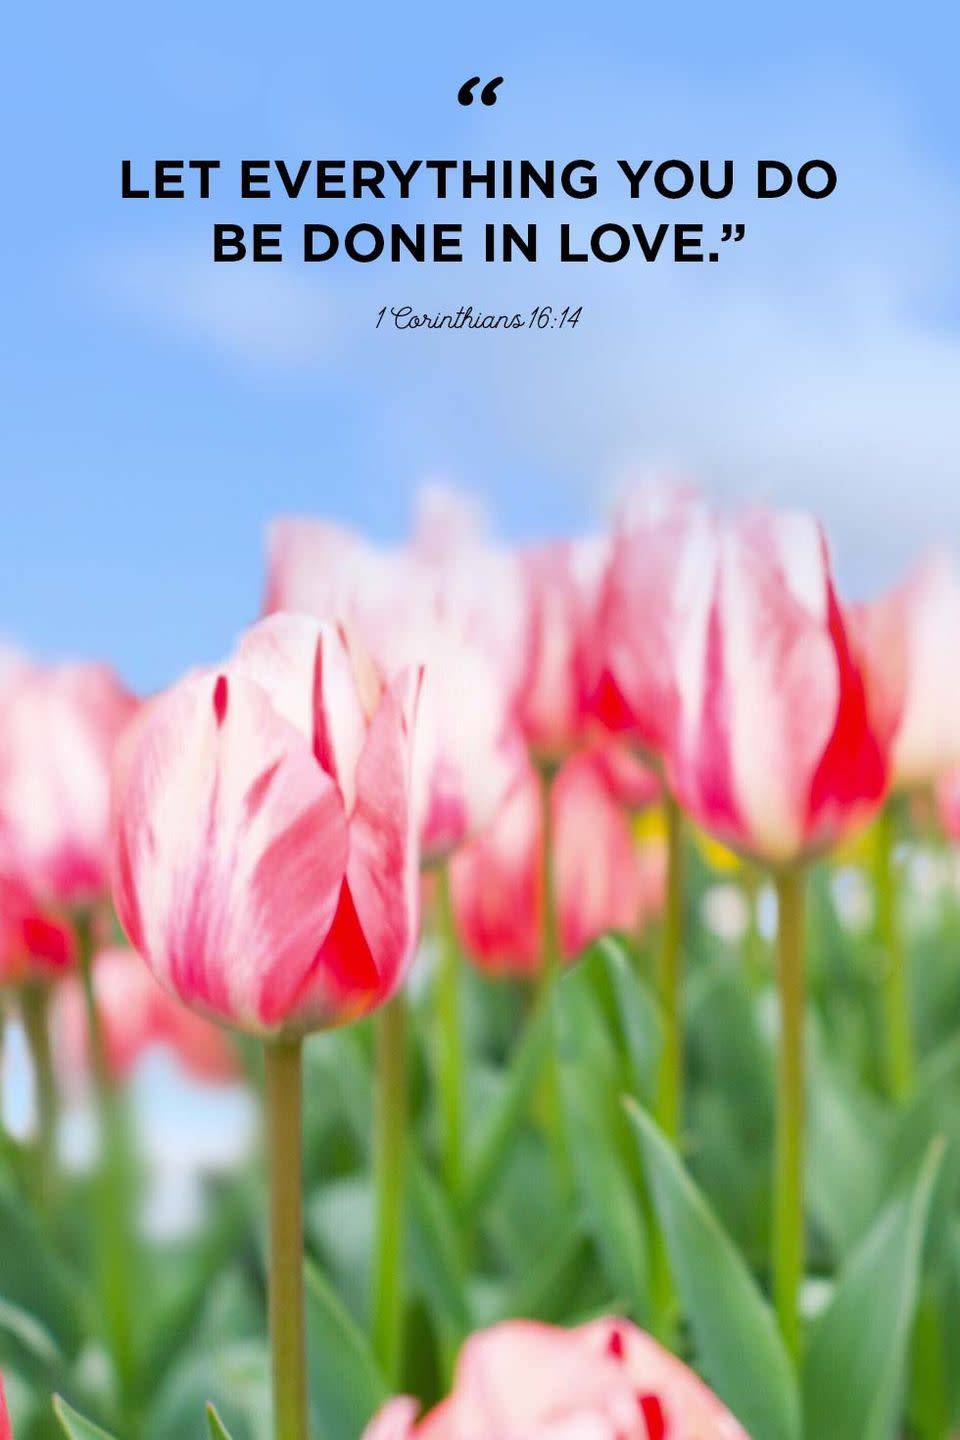 <p>"Let everything you do be done in love."</p>